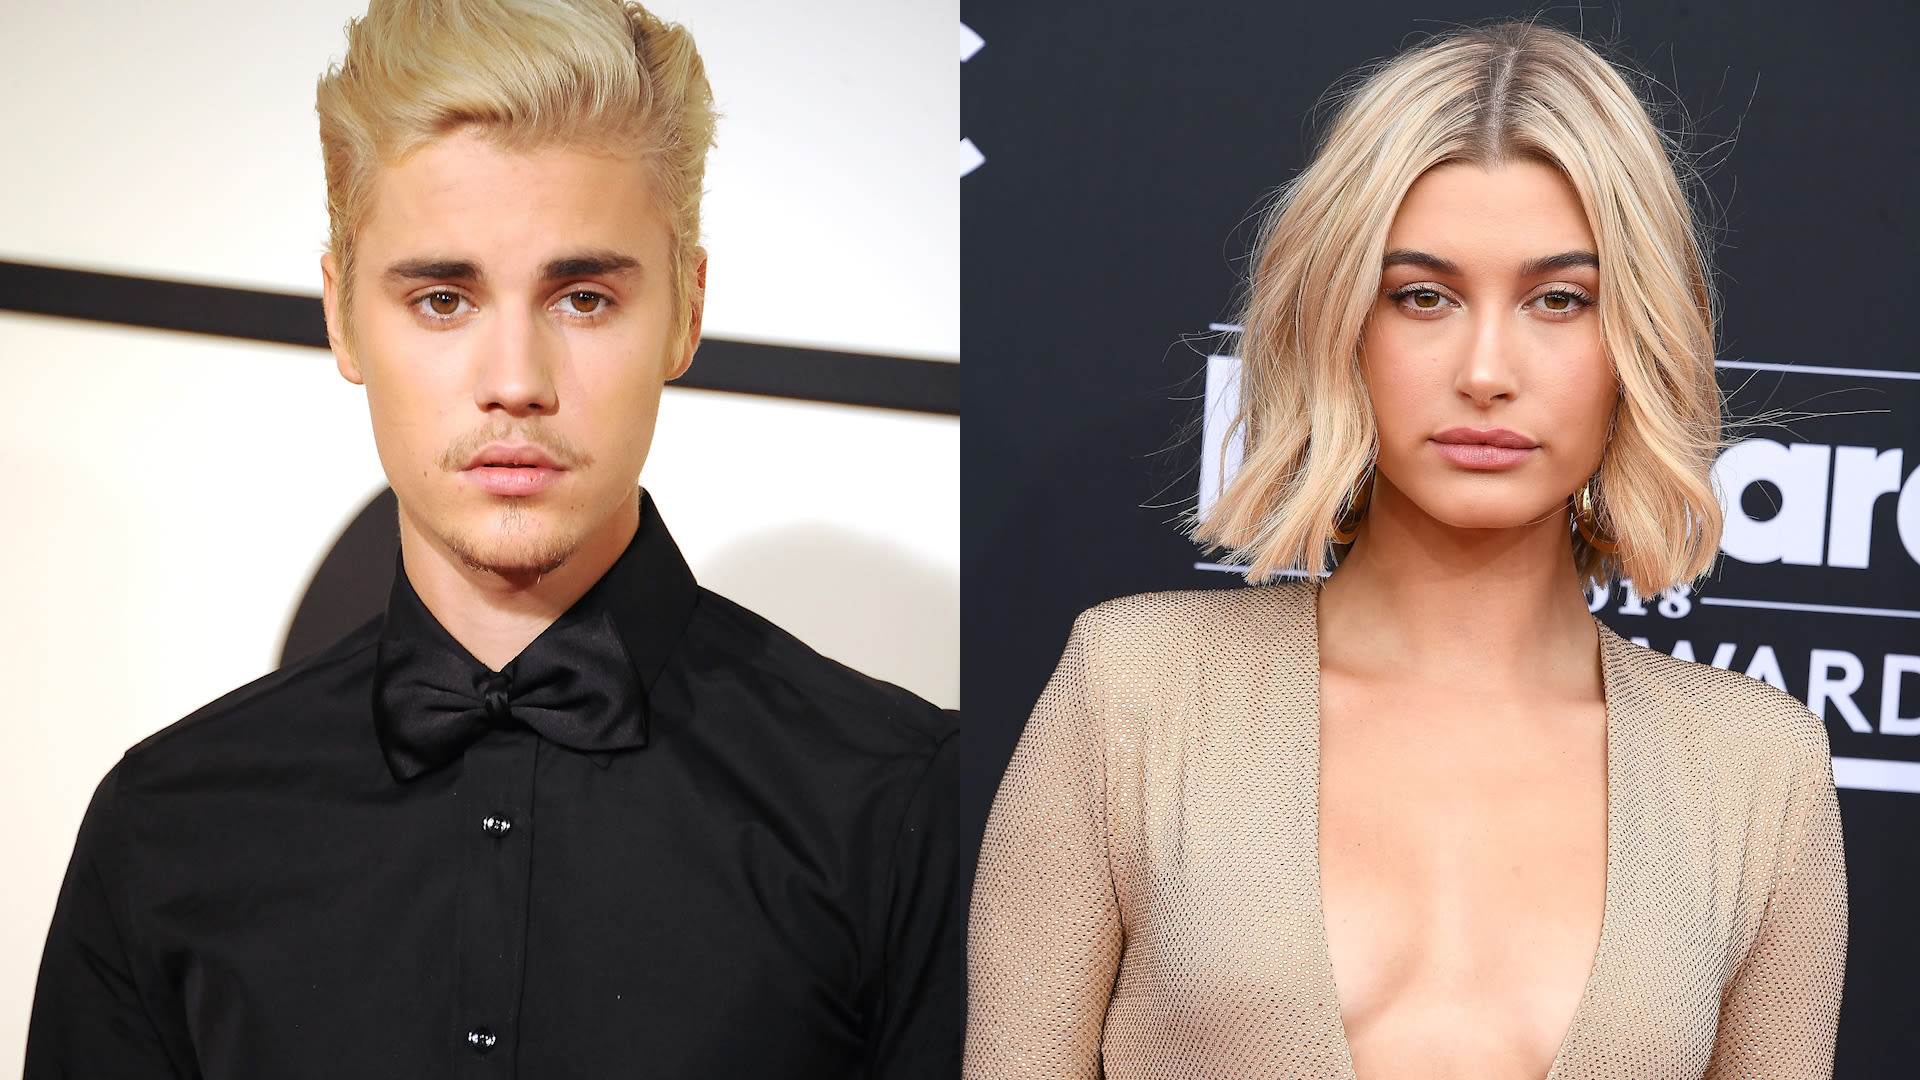 Watch A Complete Timeline of Justin Bieber and Hailey Baldwin's